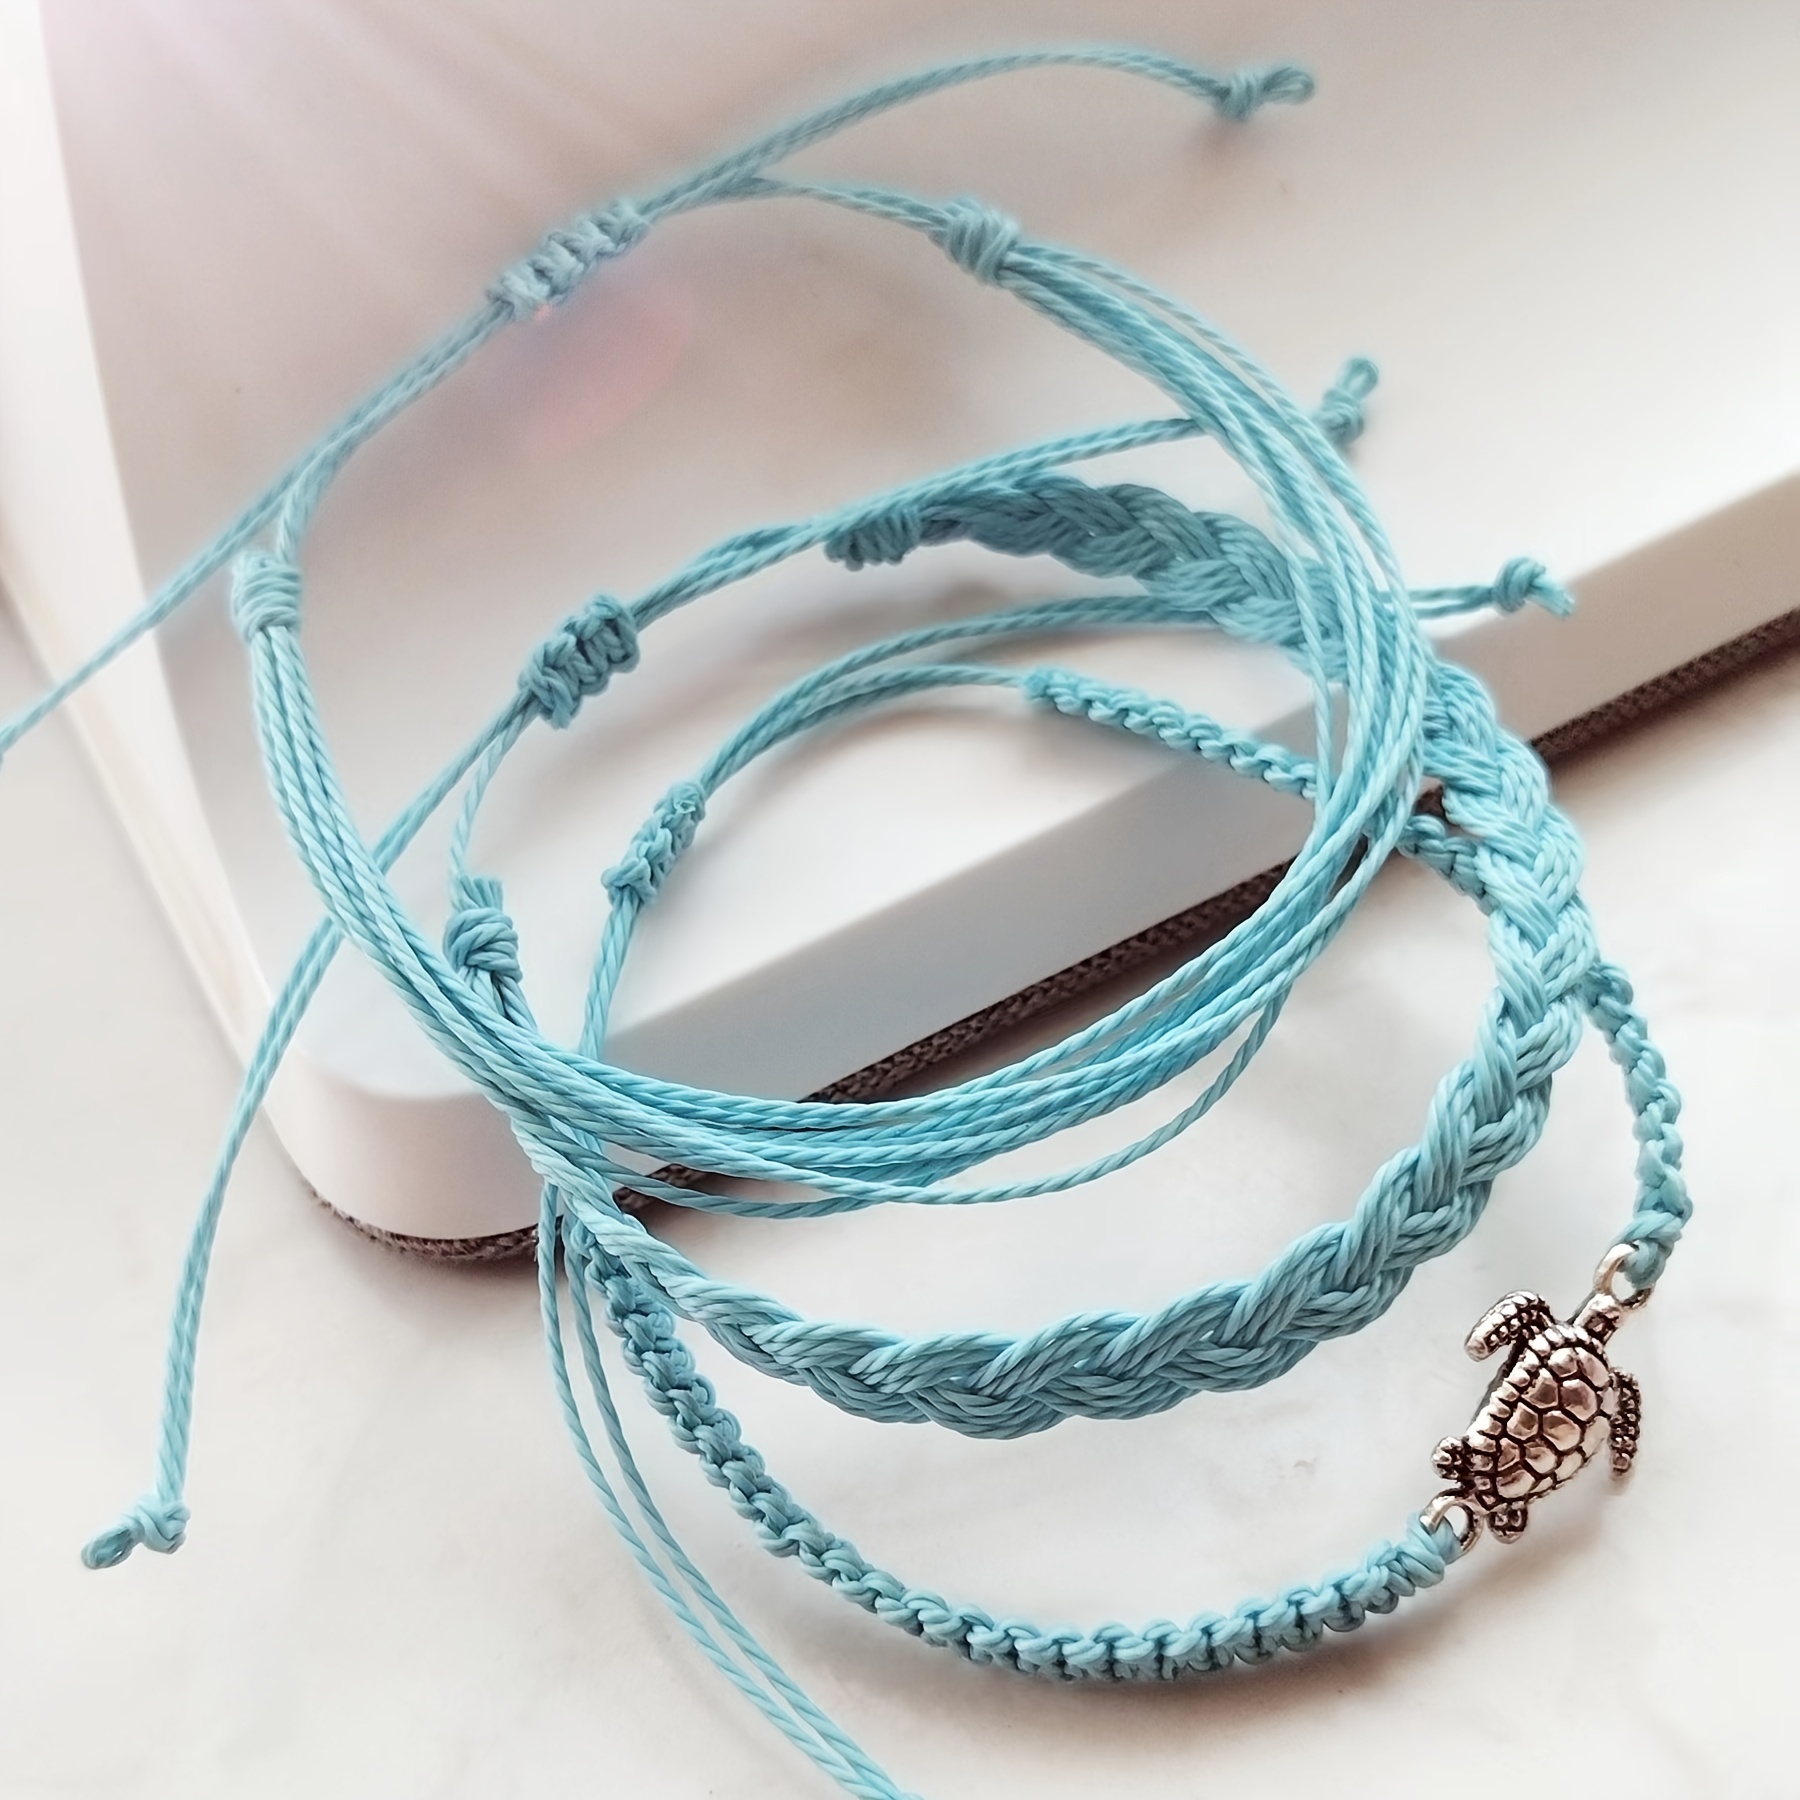 Beaded String Bracelet in Blue and Black Waterproof Wax Cord Bracelet With  Seed Beads Summer Waxed Thread Jewelry Gift Under 10 